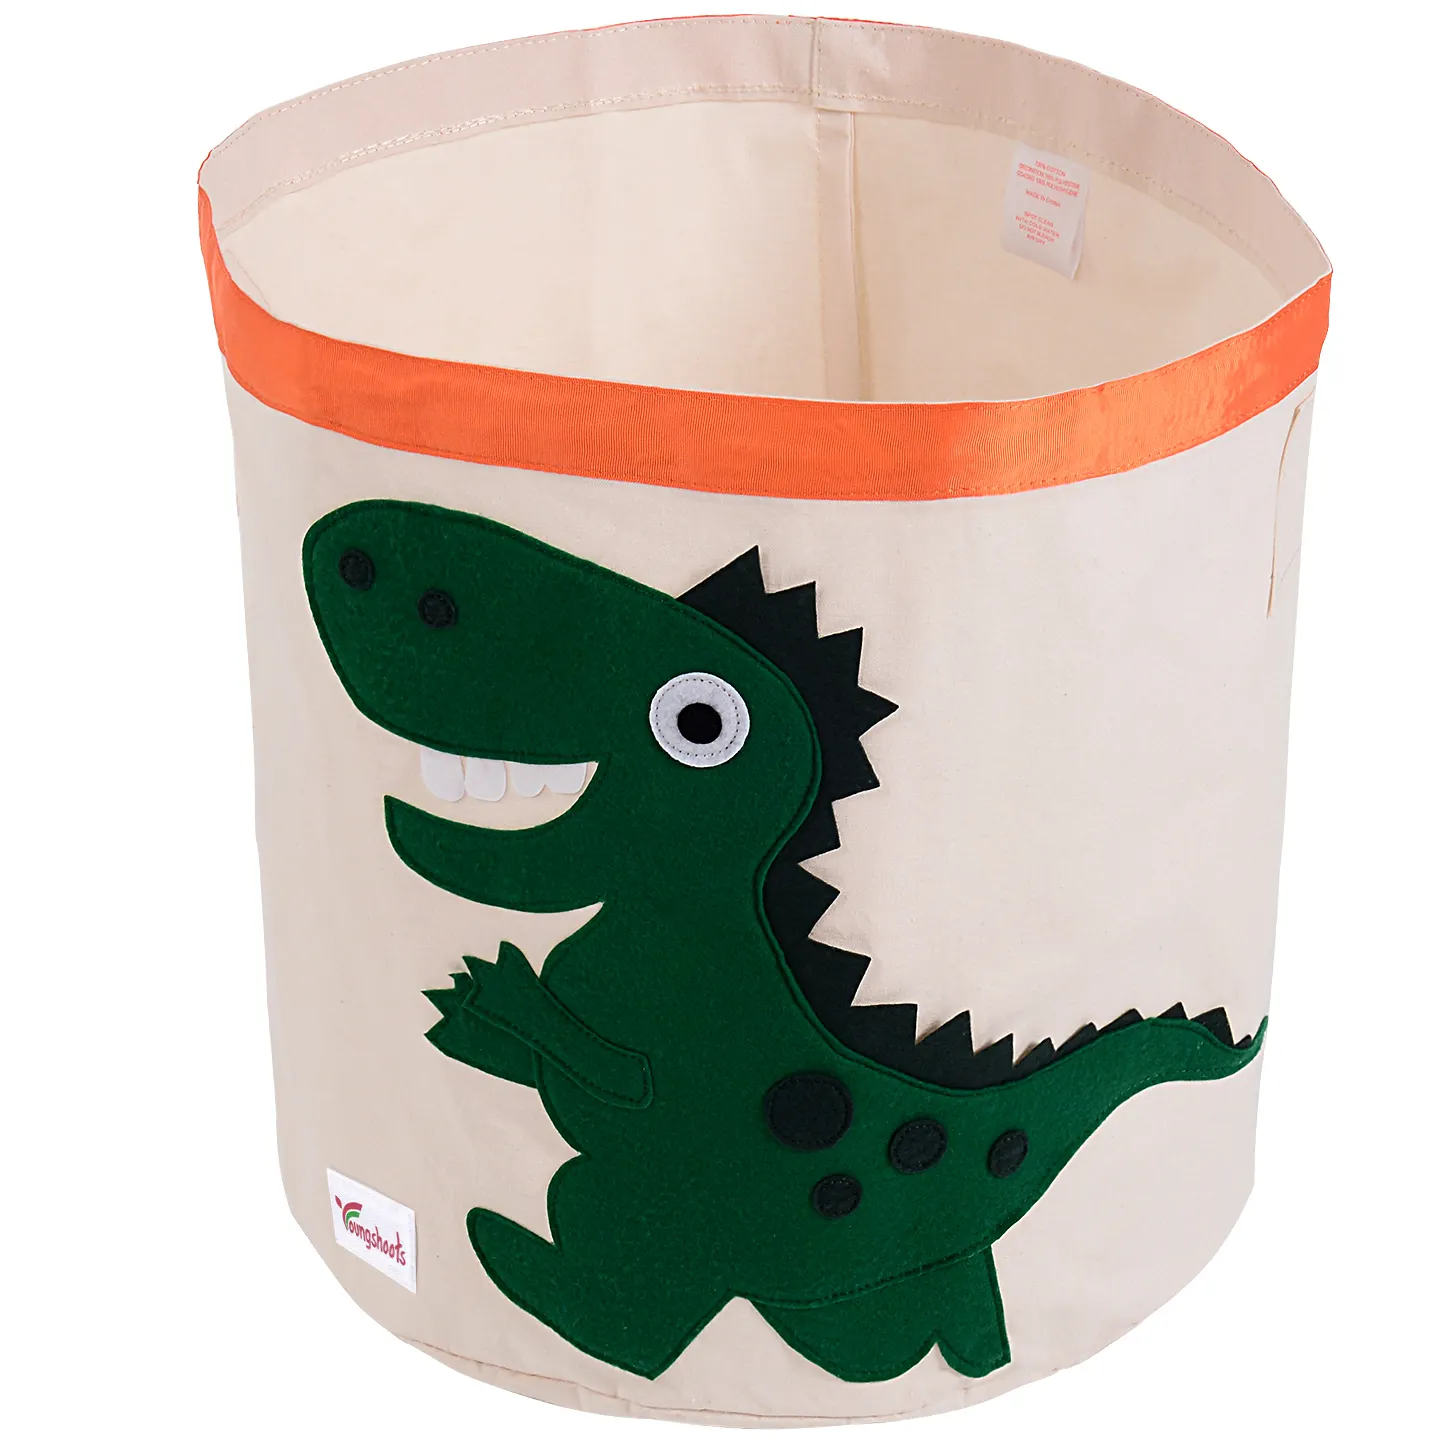 Wholesale Fabric Foldable Waterproof Children's Cartoon Dirty Clothes Hamper Collapsible Laundry Storage Basket